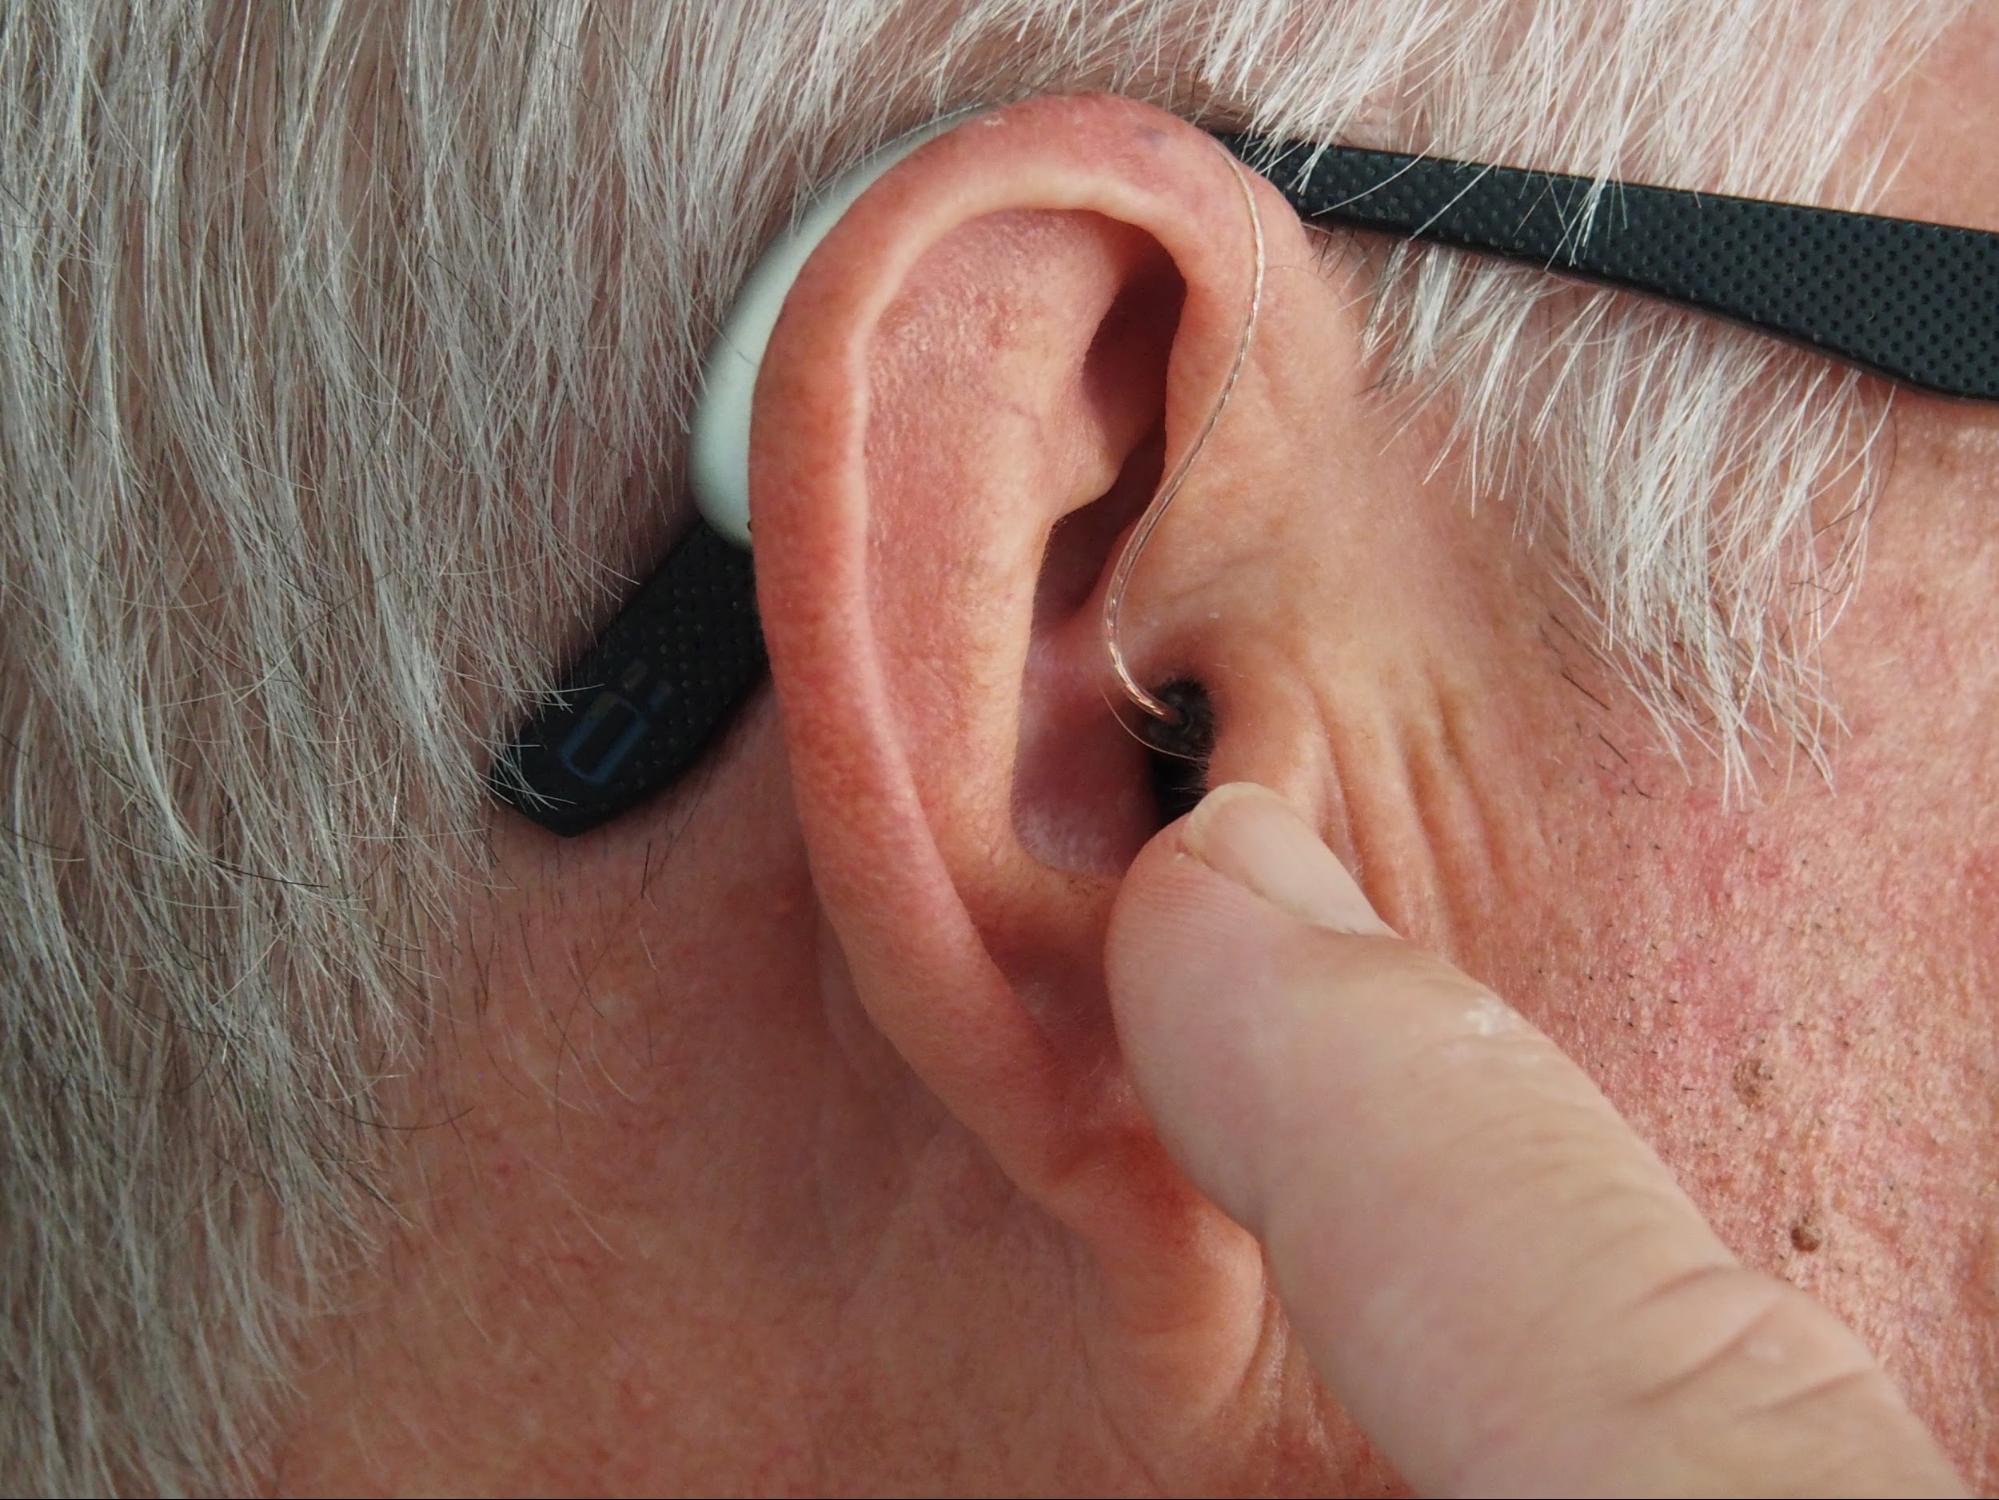 Hearing aid care: how to clean your hearing aids